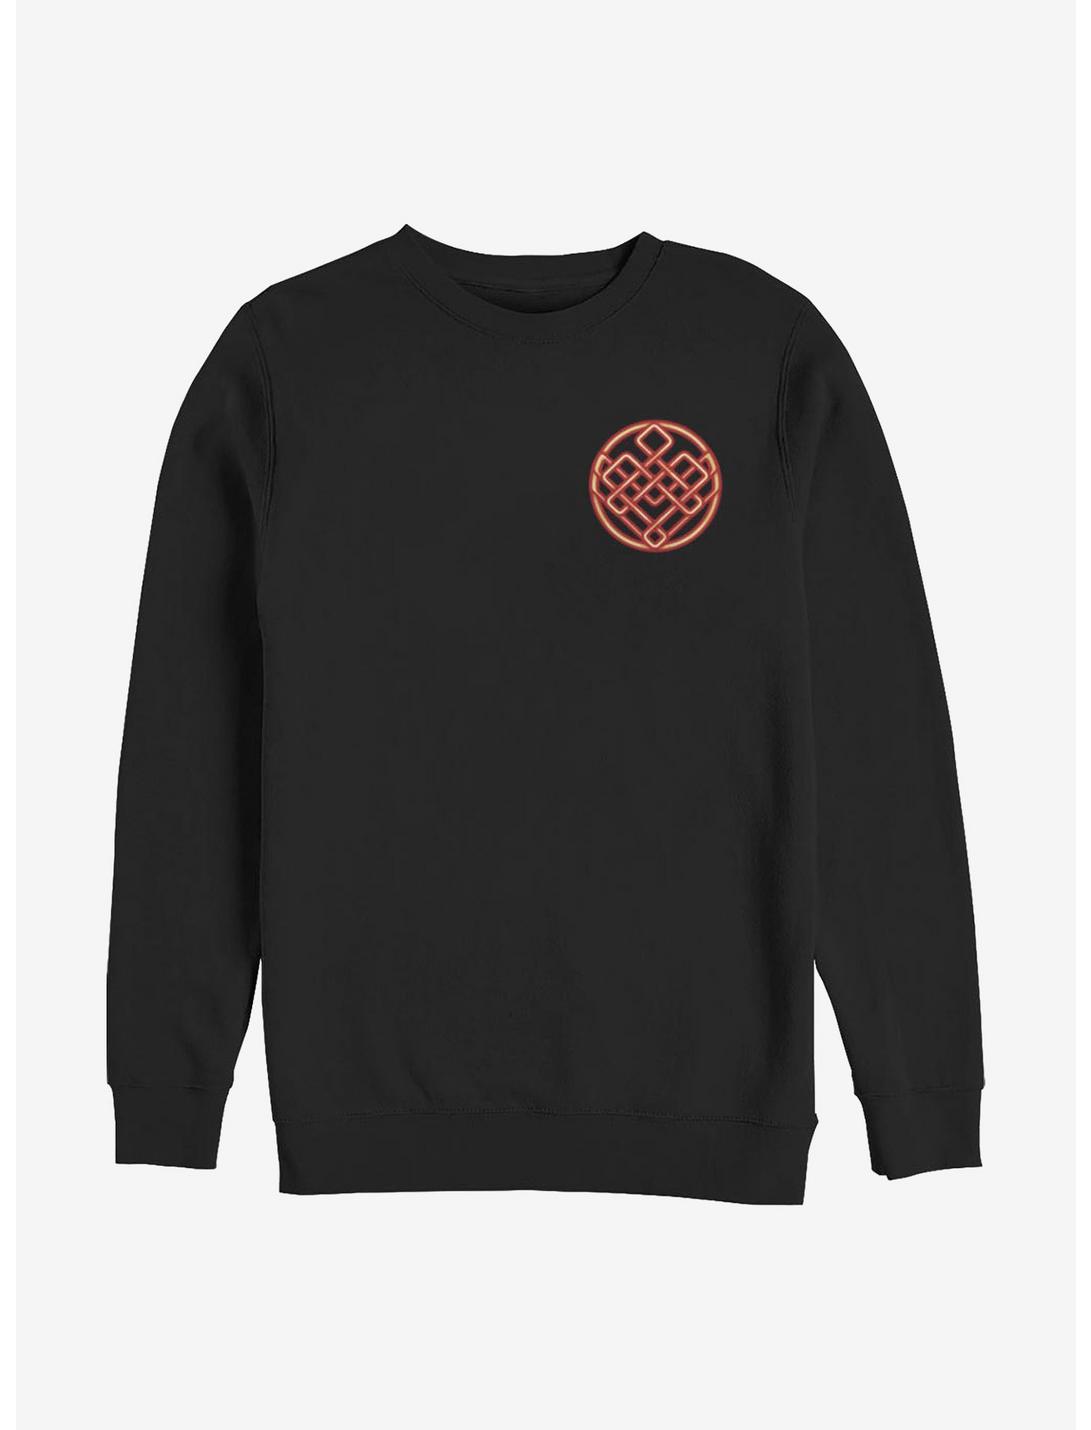 Marvel Shang-Chi And The Legend Of The Ten Rings Neon Symbol Sweatshirt, BLACK, hi-res